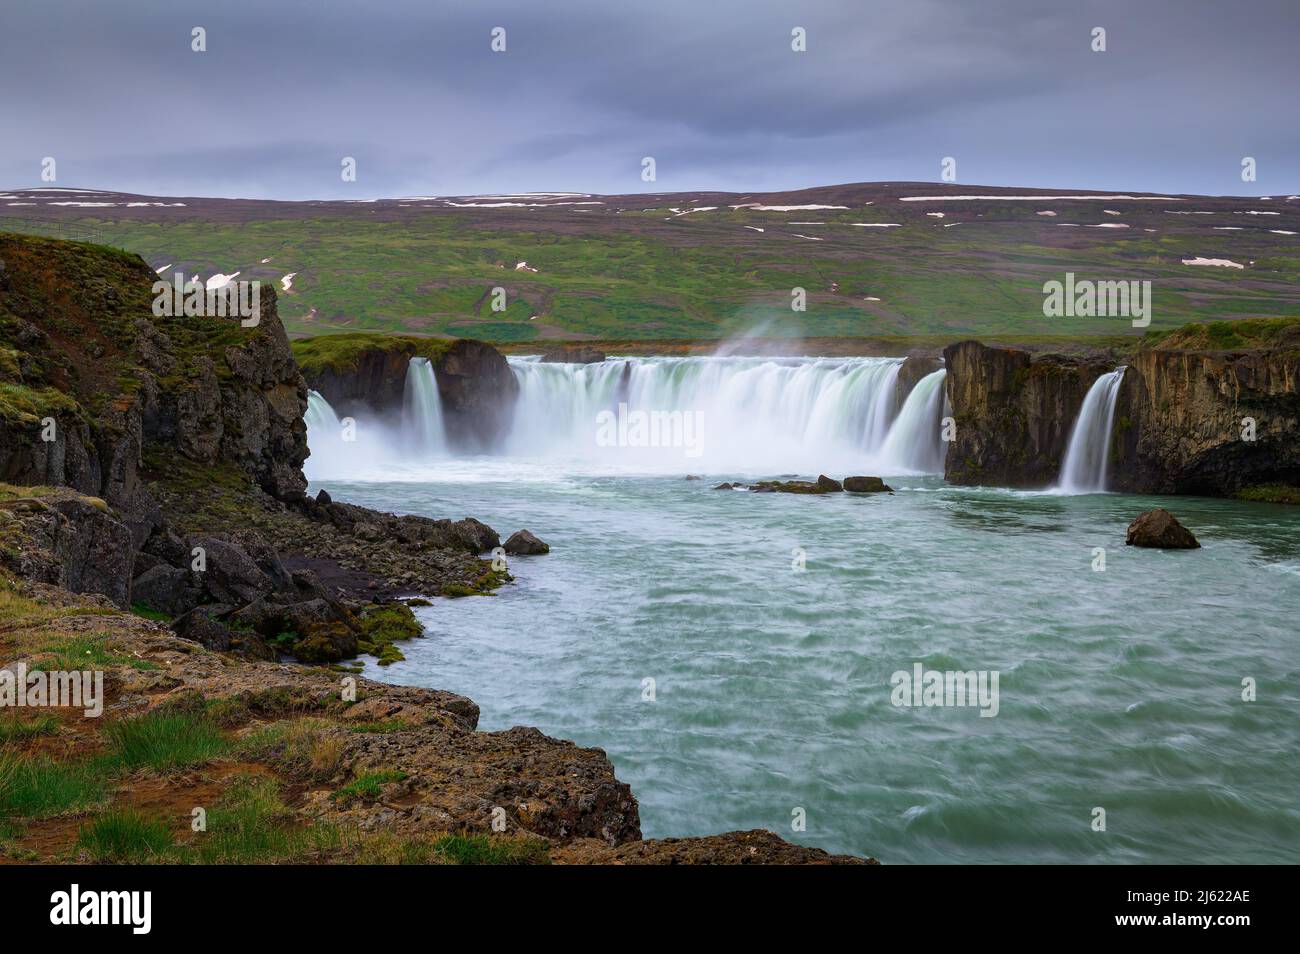 Godafoss waterfall in Iceland, one of the most famous icelandic waterfalls. Stock Photo